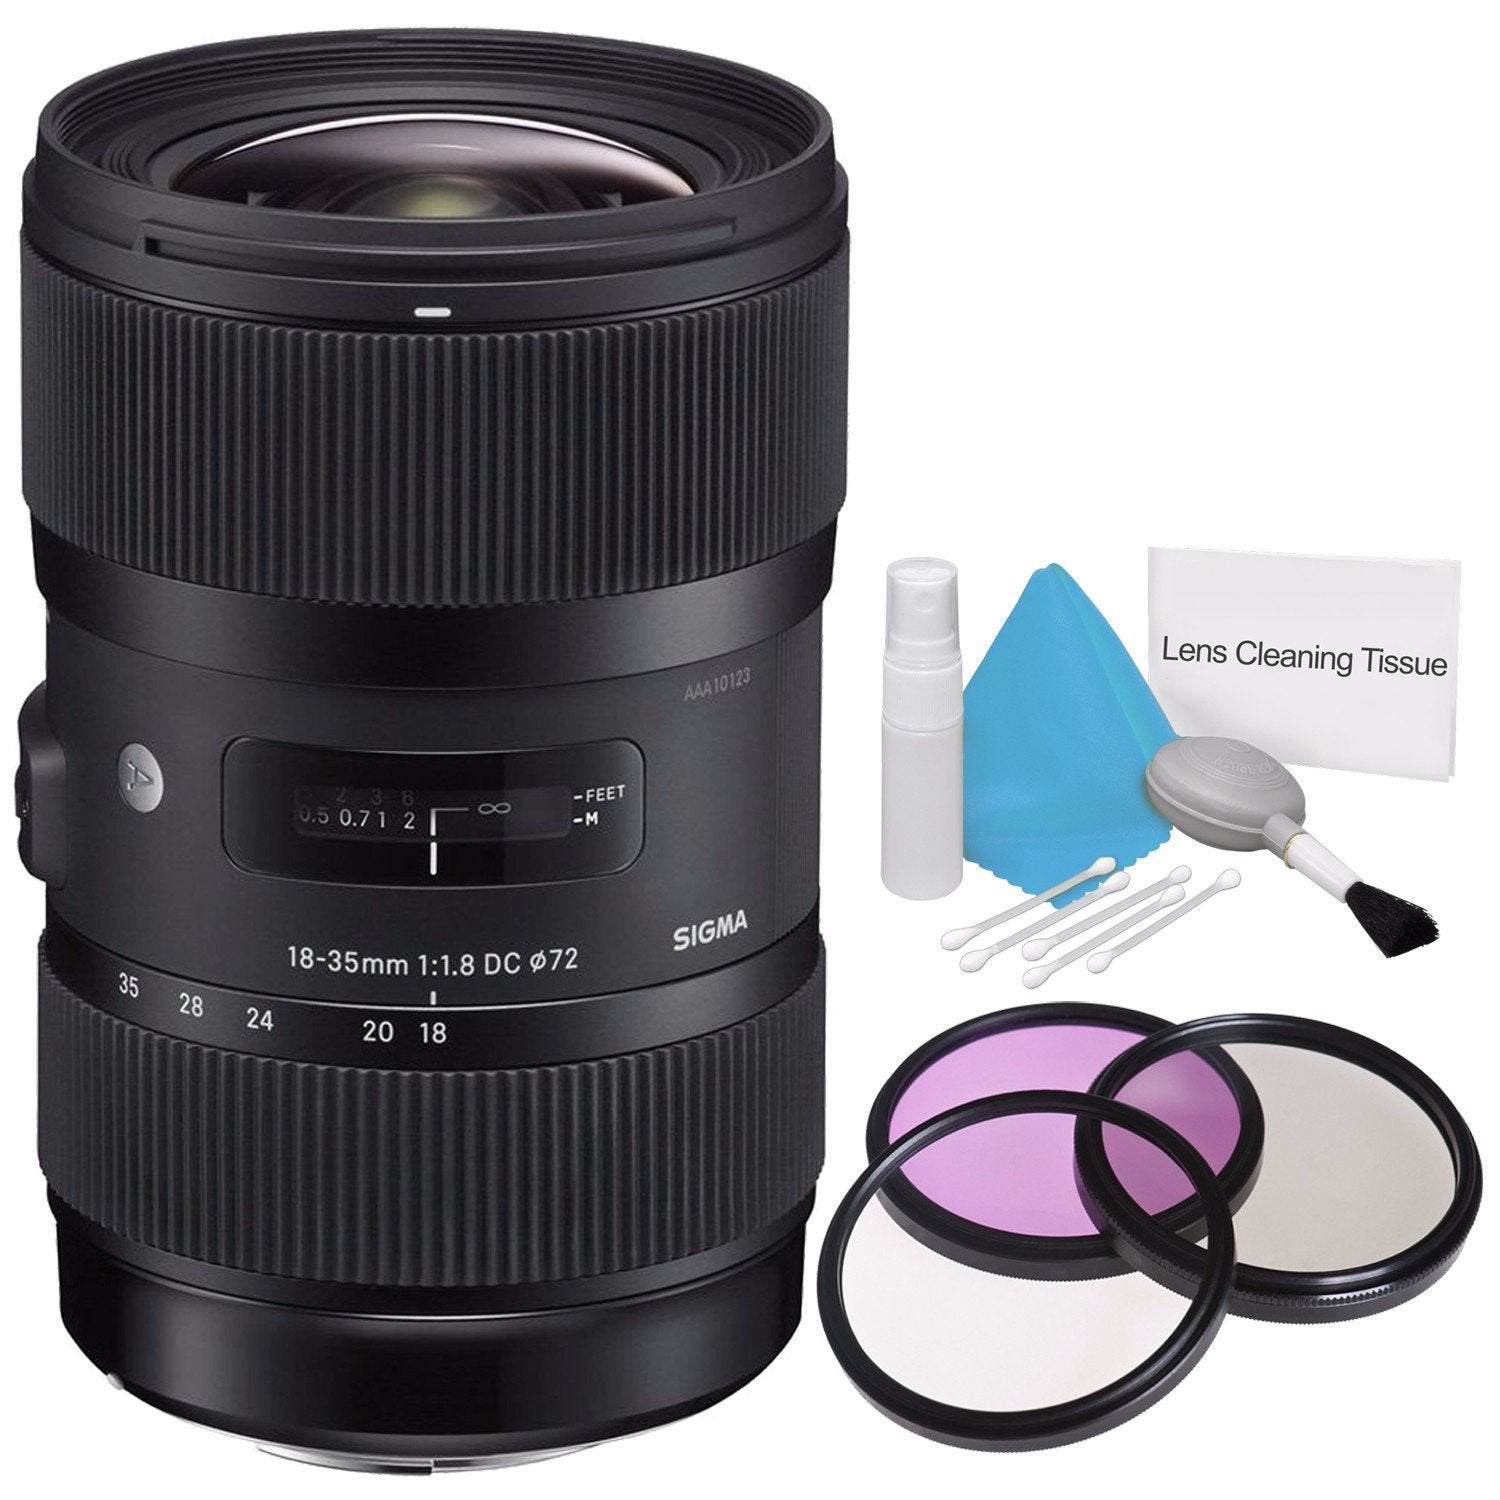 Sigma 18-35mm f/1.8 DC HSM Art Lens for Canon (International Model) + 72mm 3 Piece Filter Kit + Deluxe Cleaning Kit Bund